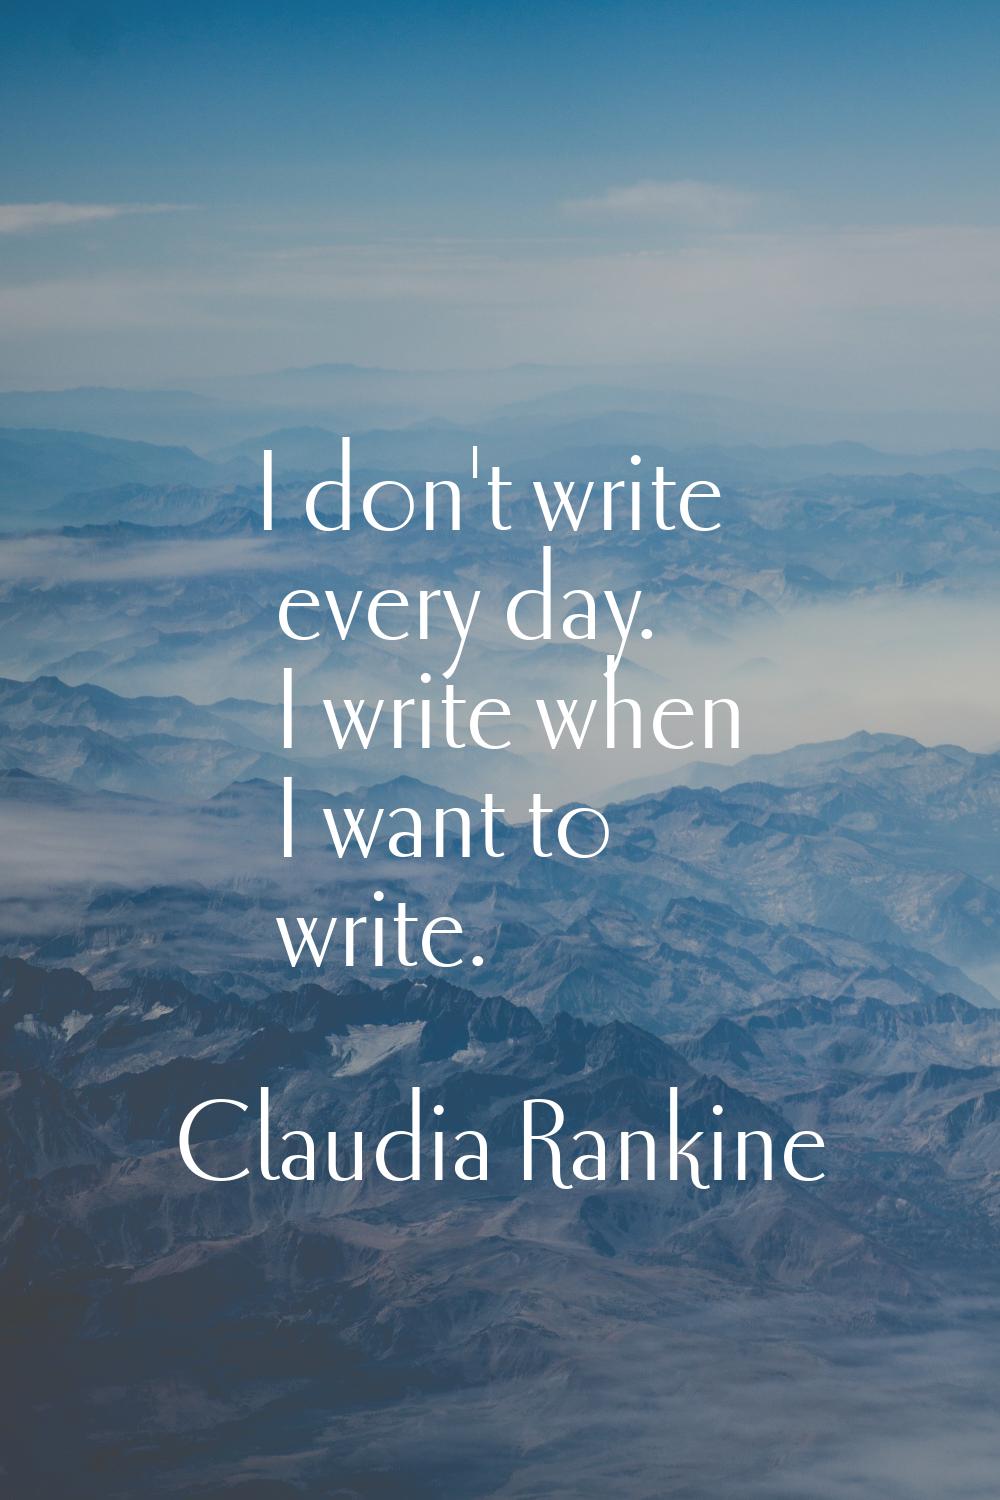 I don't write every day. I write when I want to write.